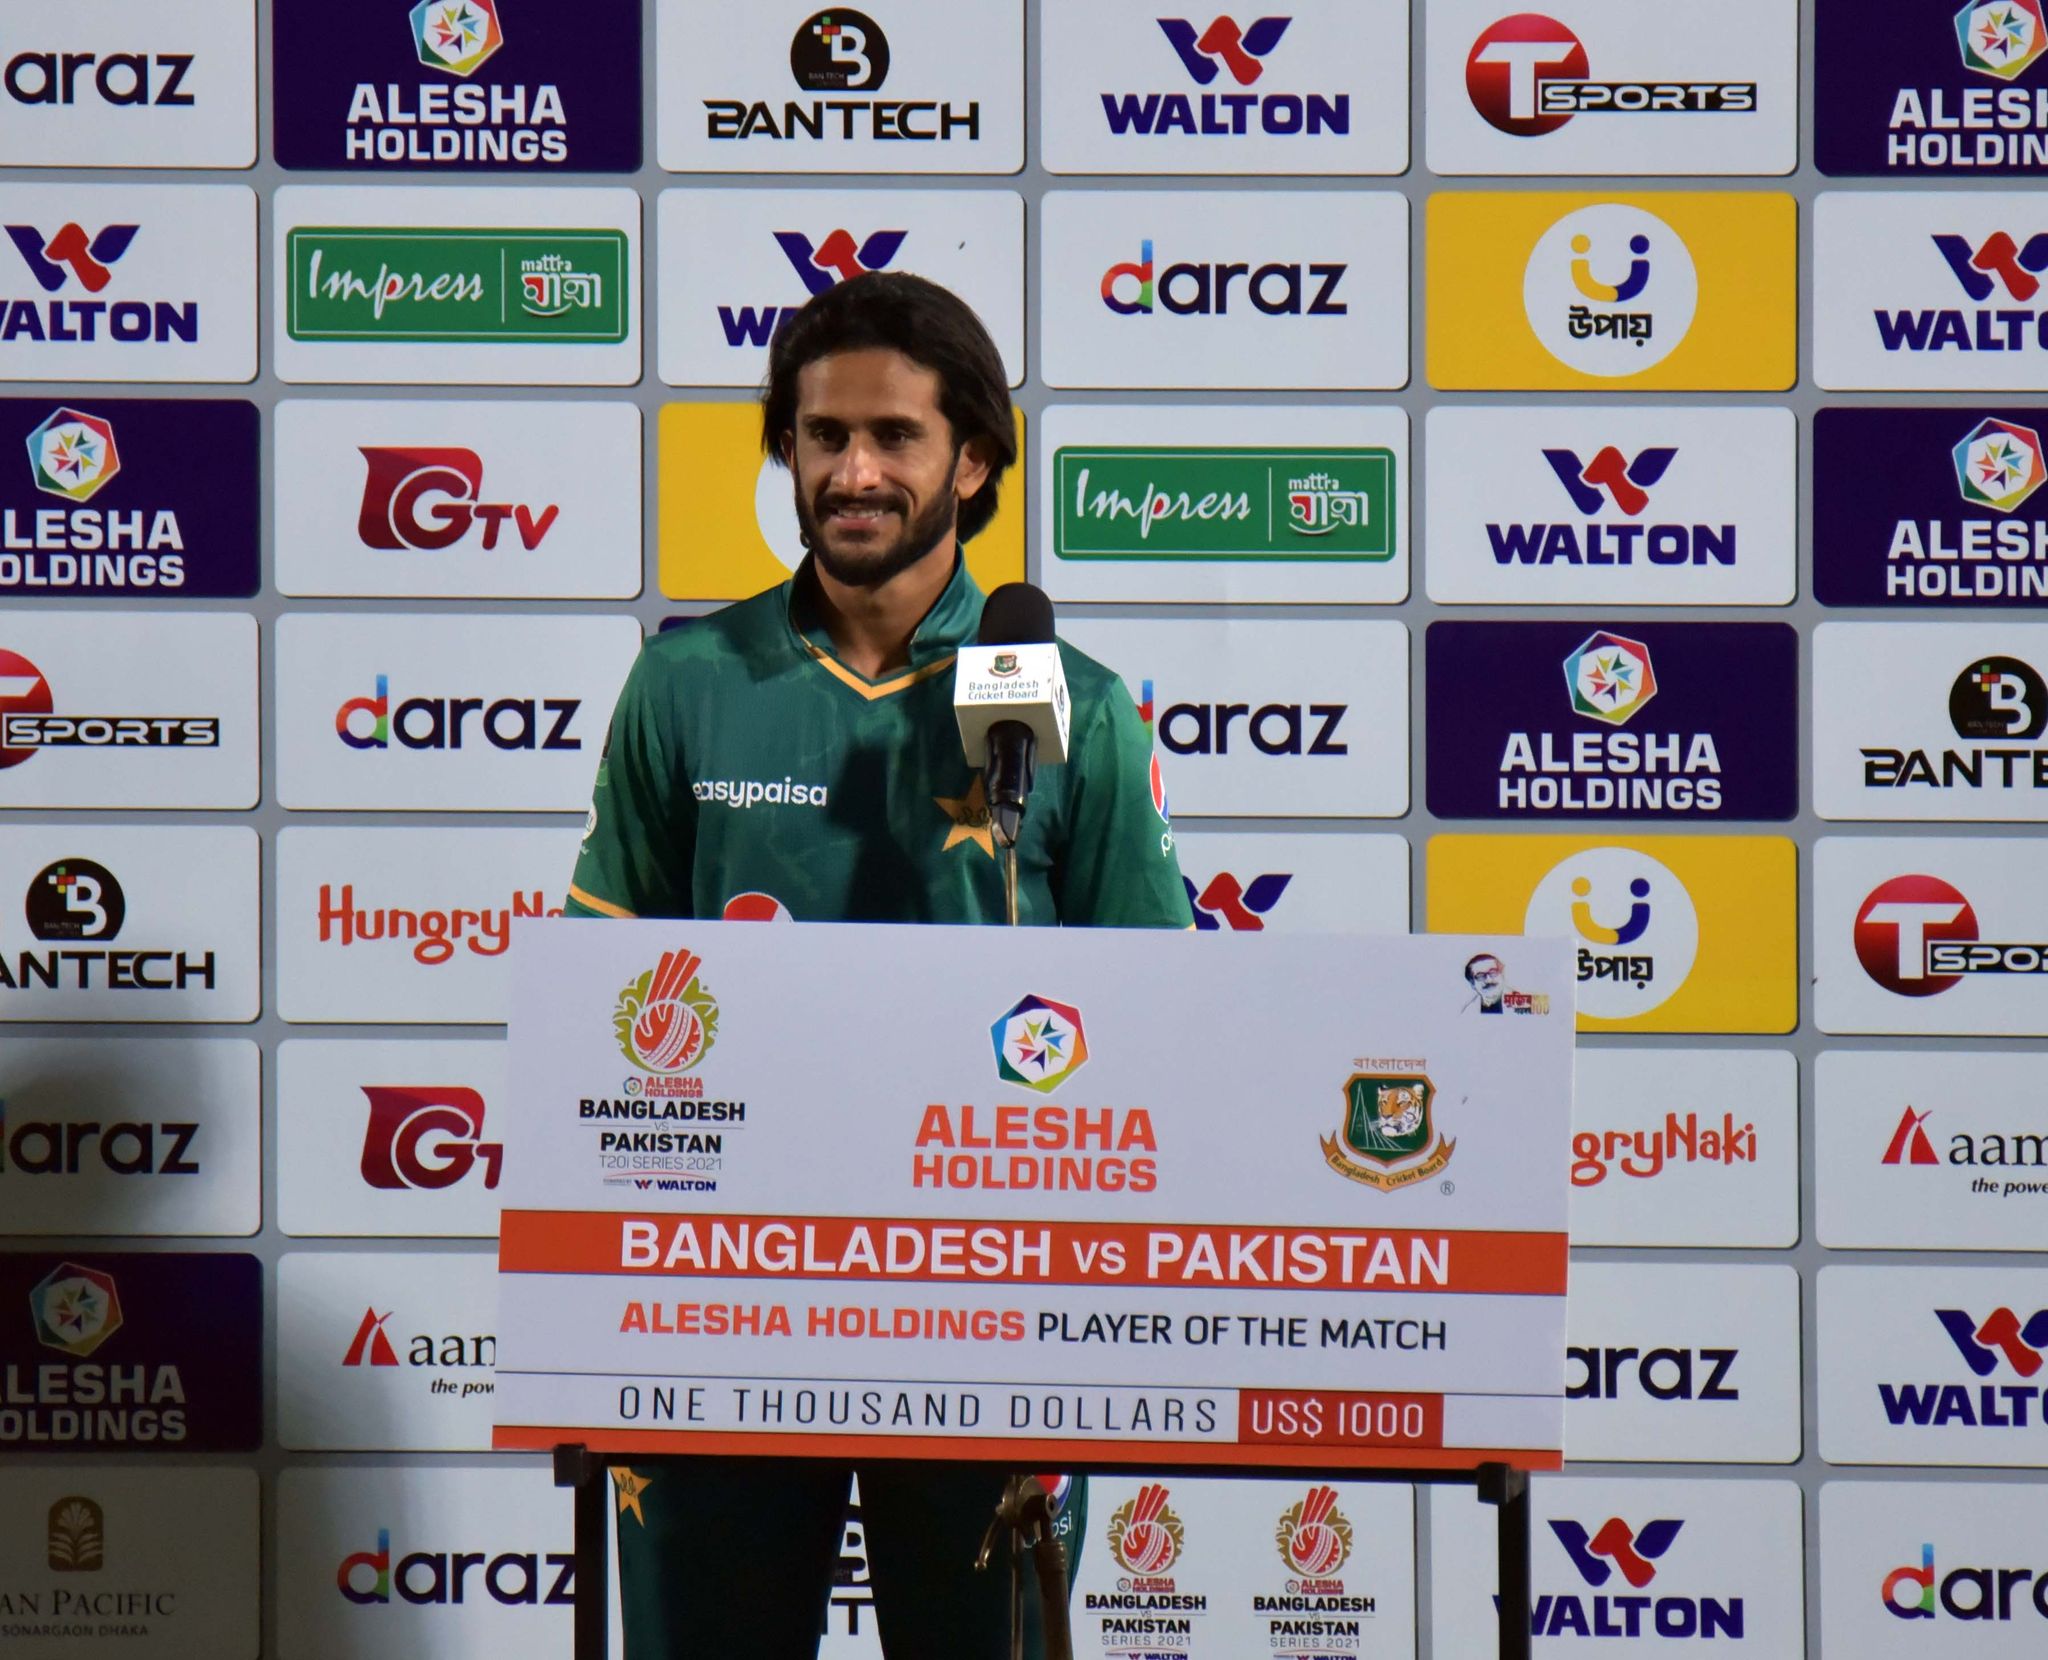 BPL experience came useful for Hasan Ali